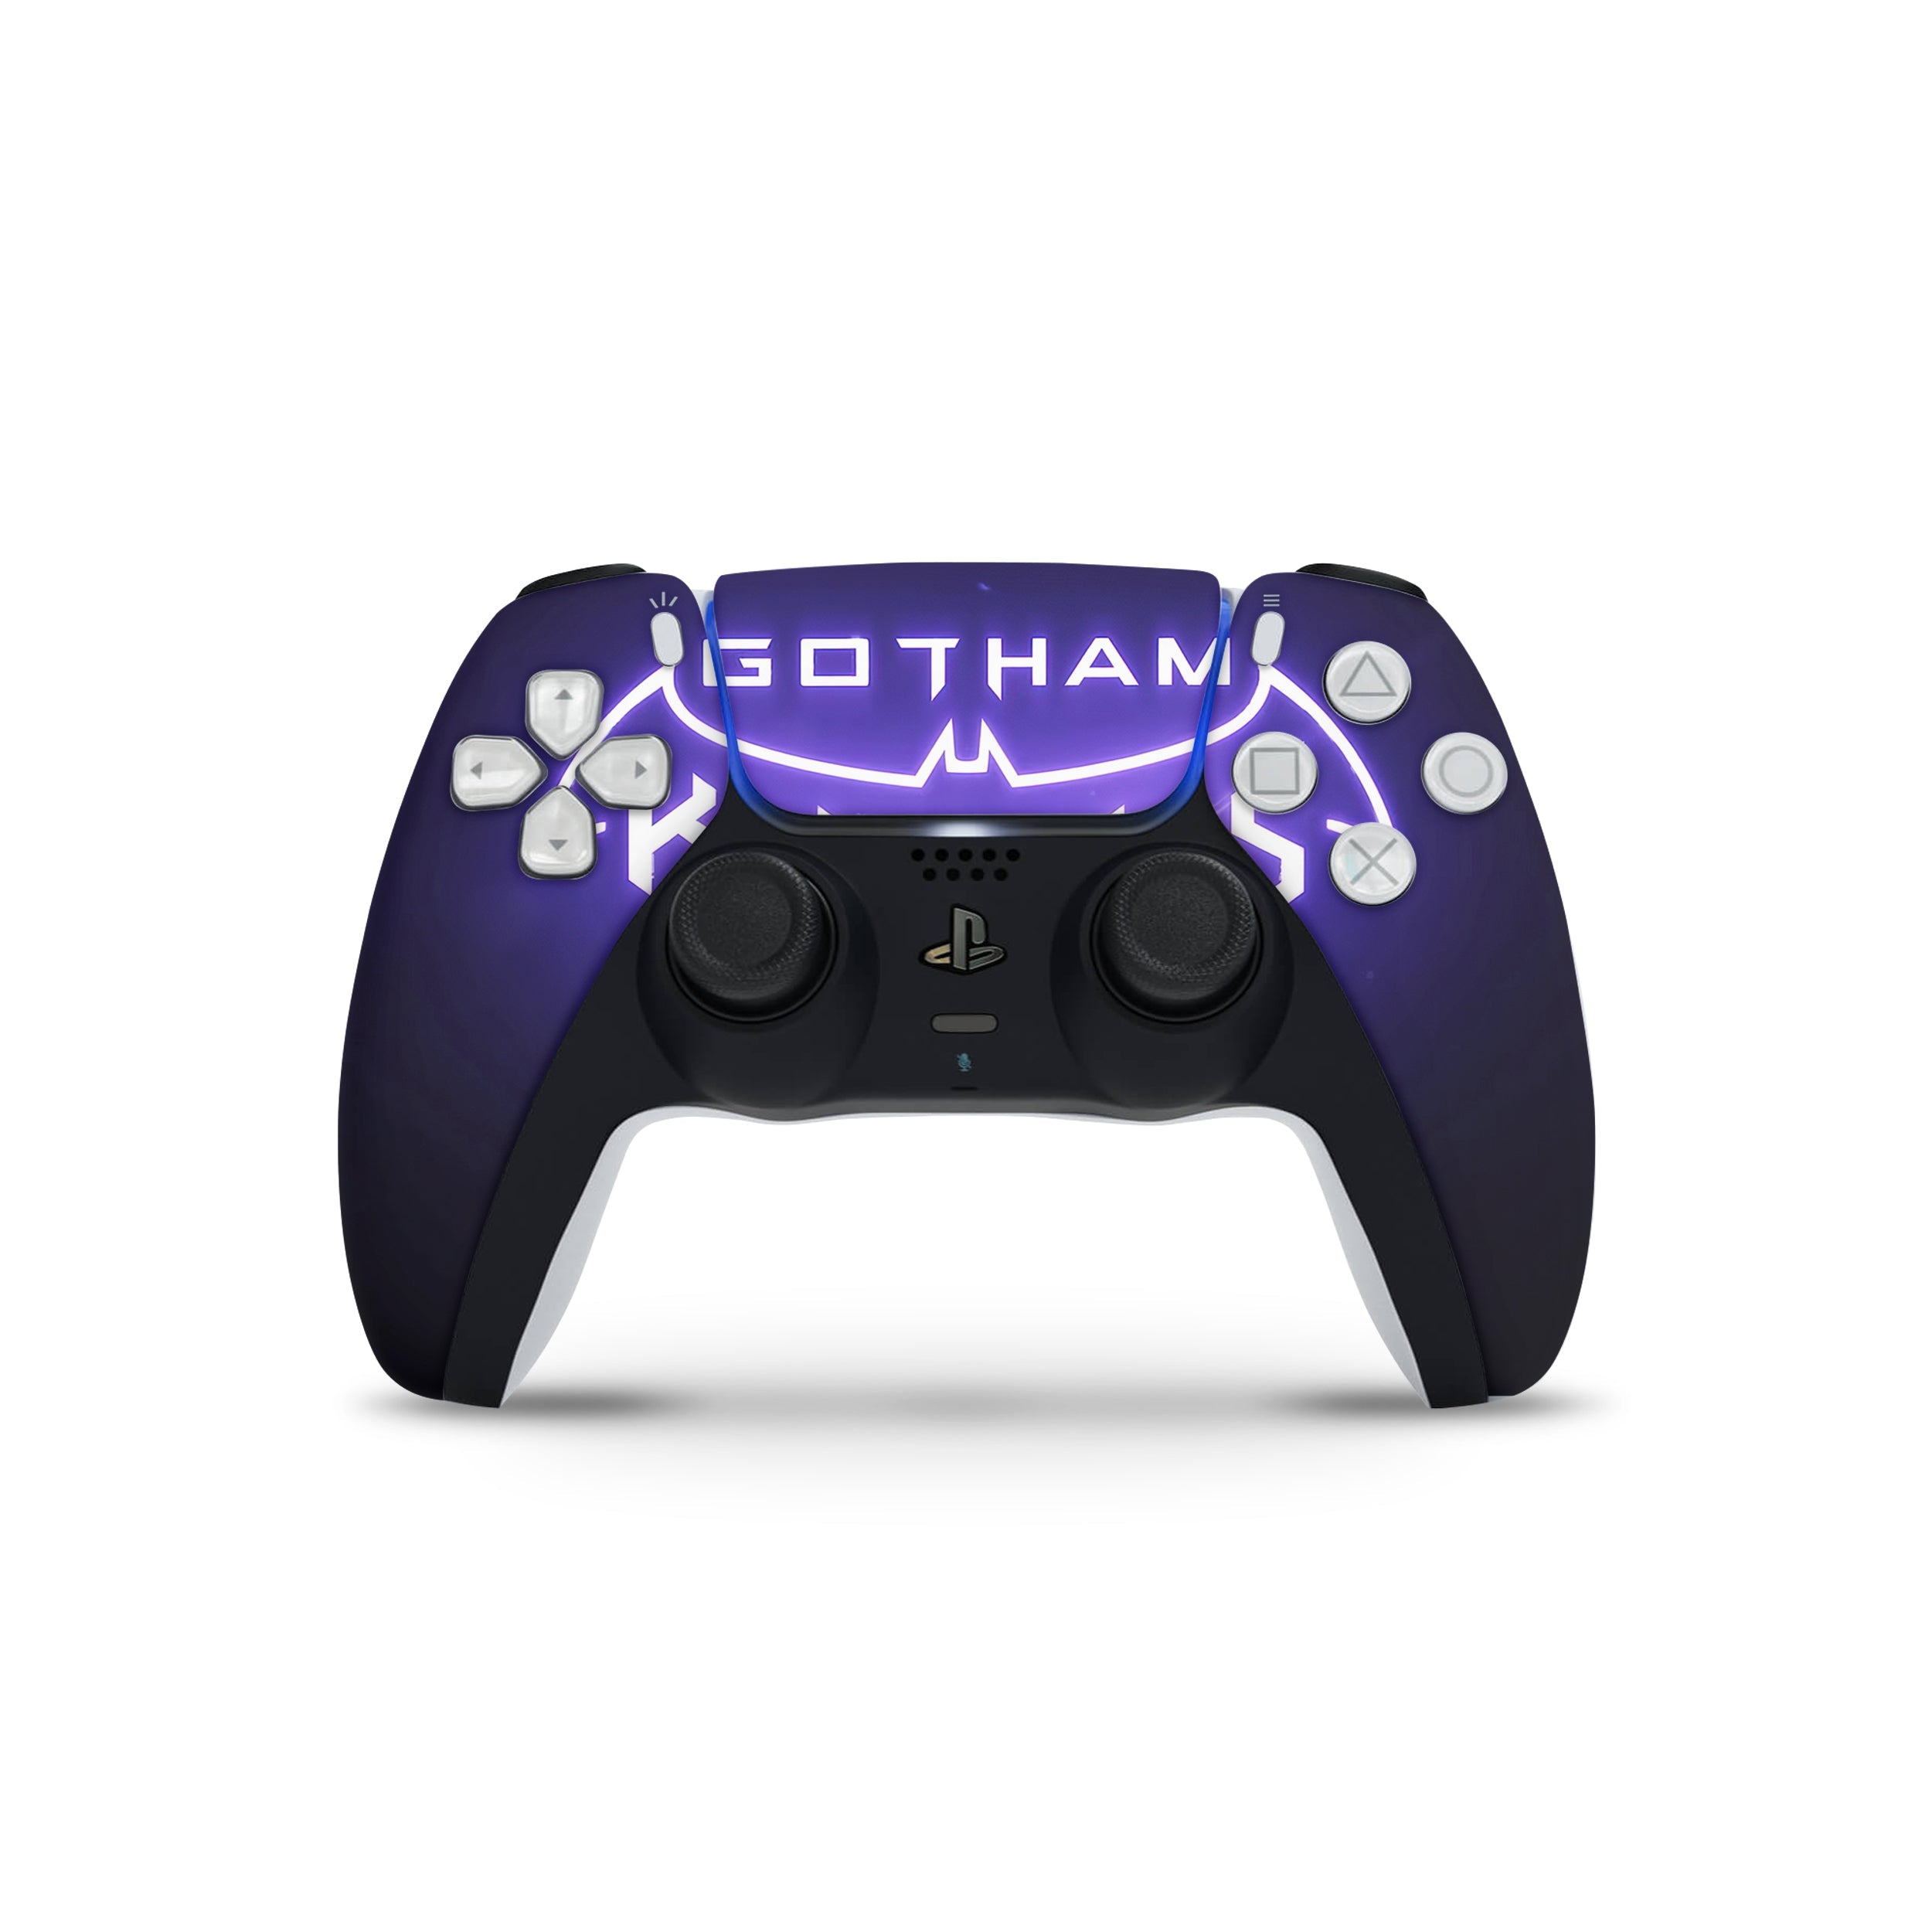 A video game skin featuring a DC Comics Gotham Knights design for the PS5 DualSense Controller.